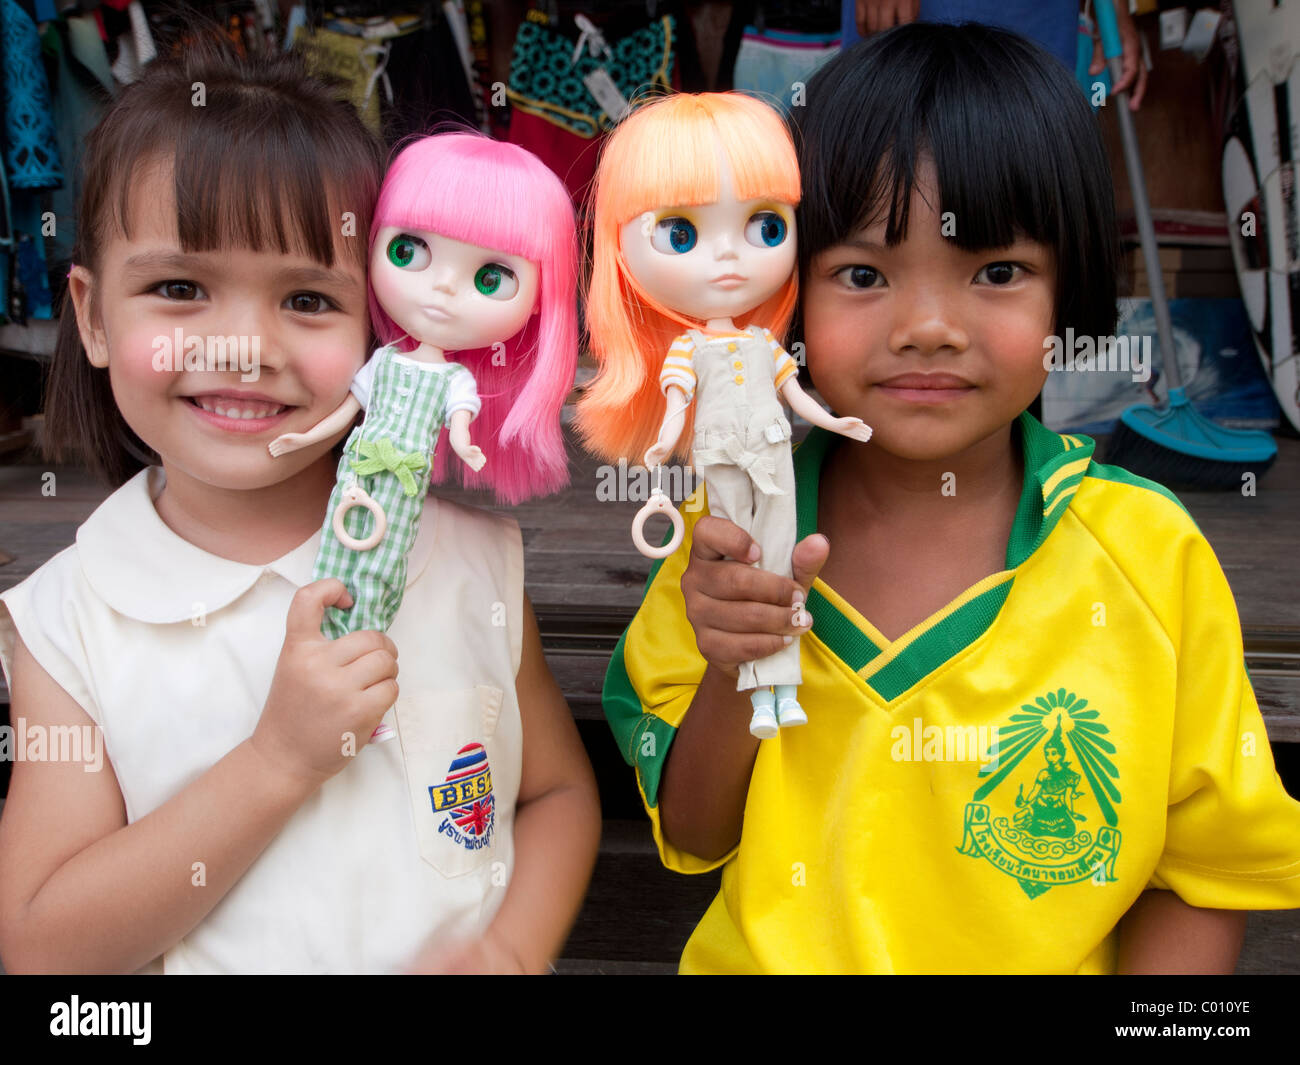 Girls playing with dolls Stock Photo